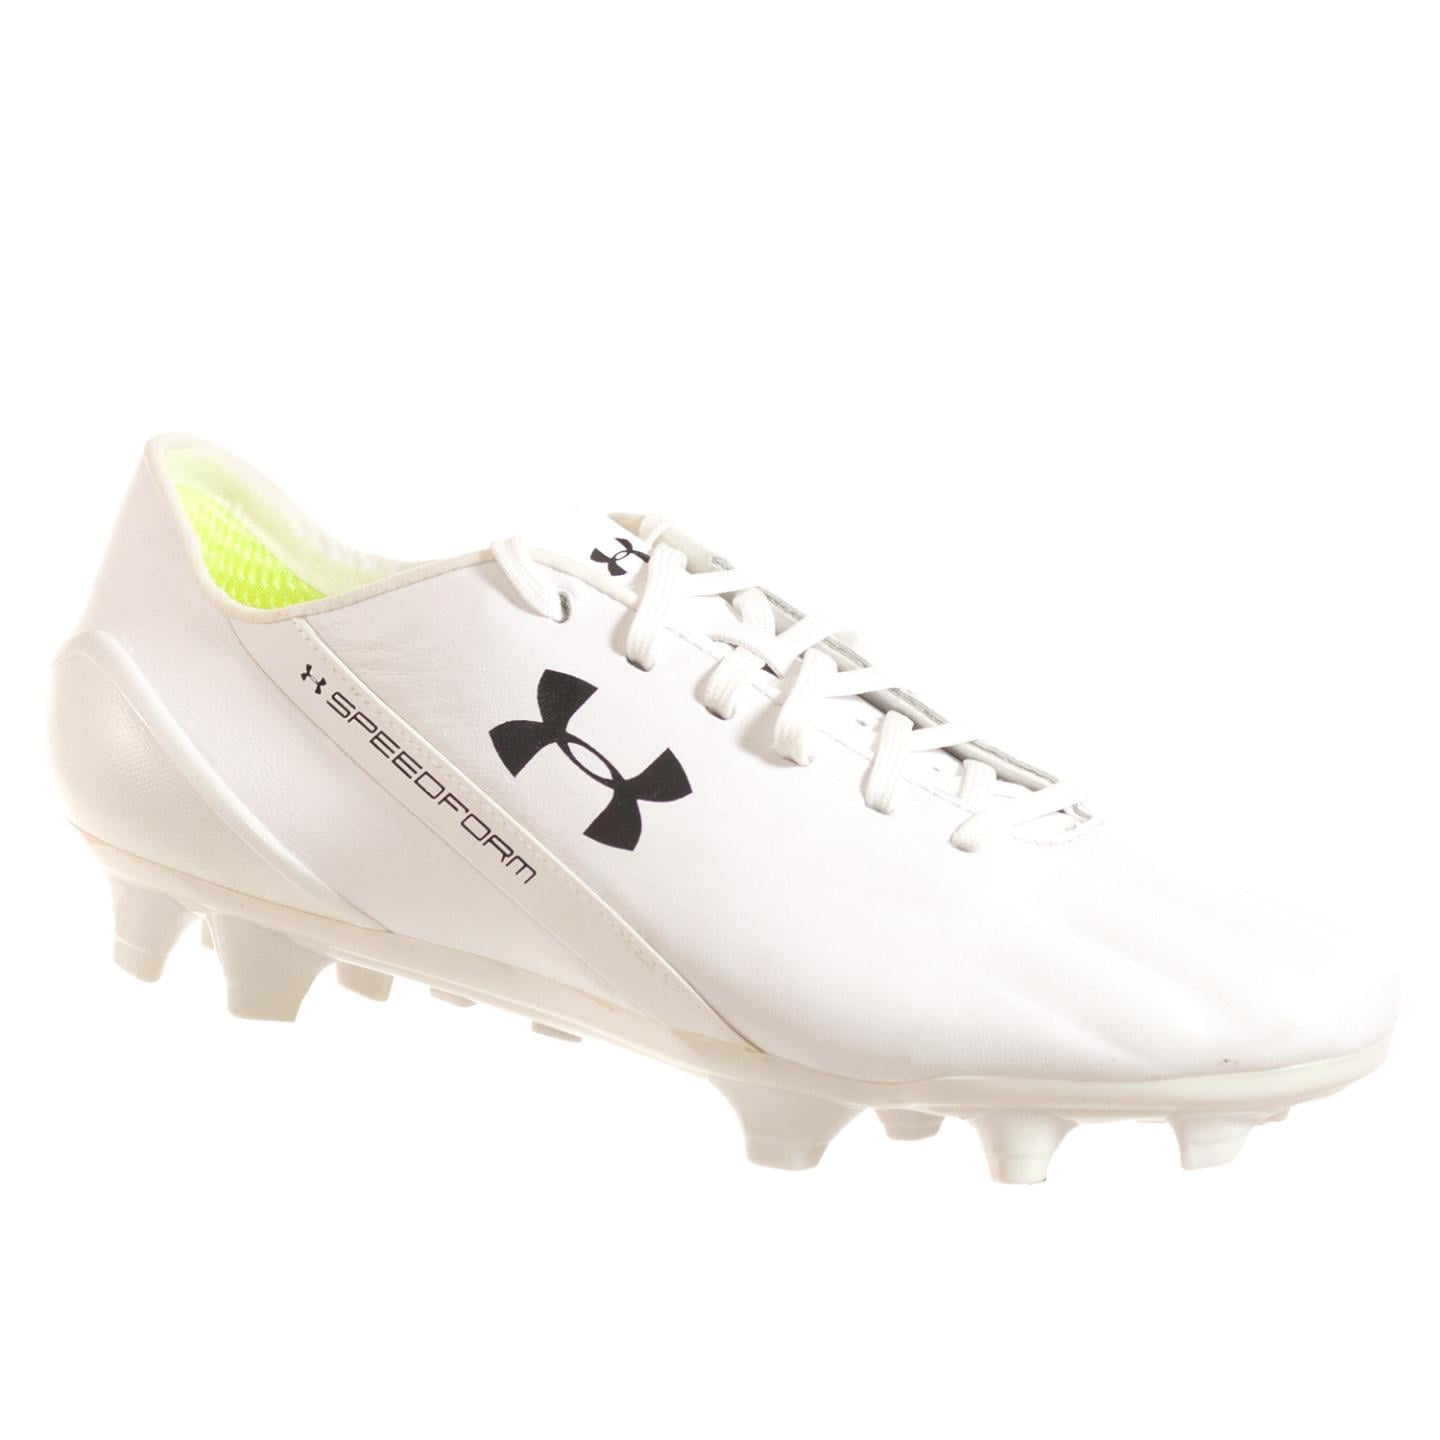 New Under Armour SPEEDFORM CRM Leather FG 1265285 002 Size 7.5 Men Soccer Cleat 